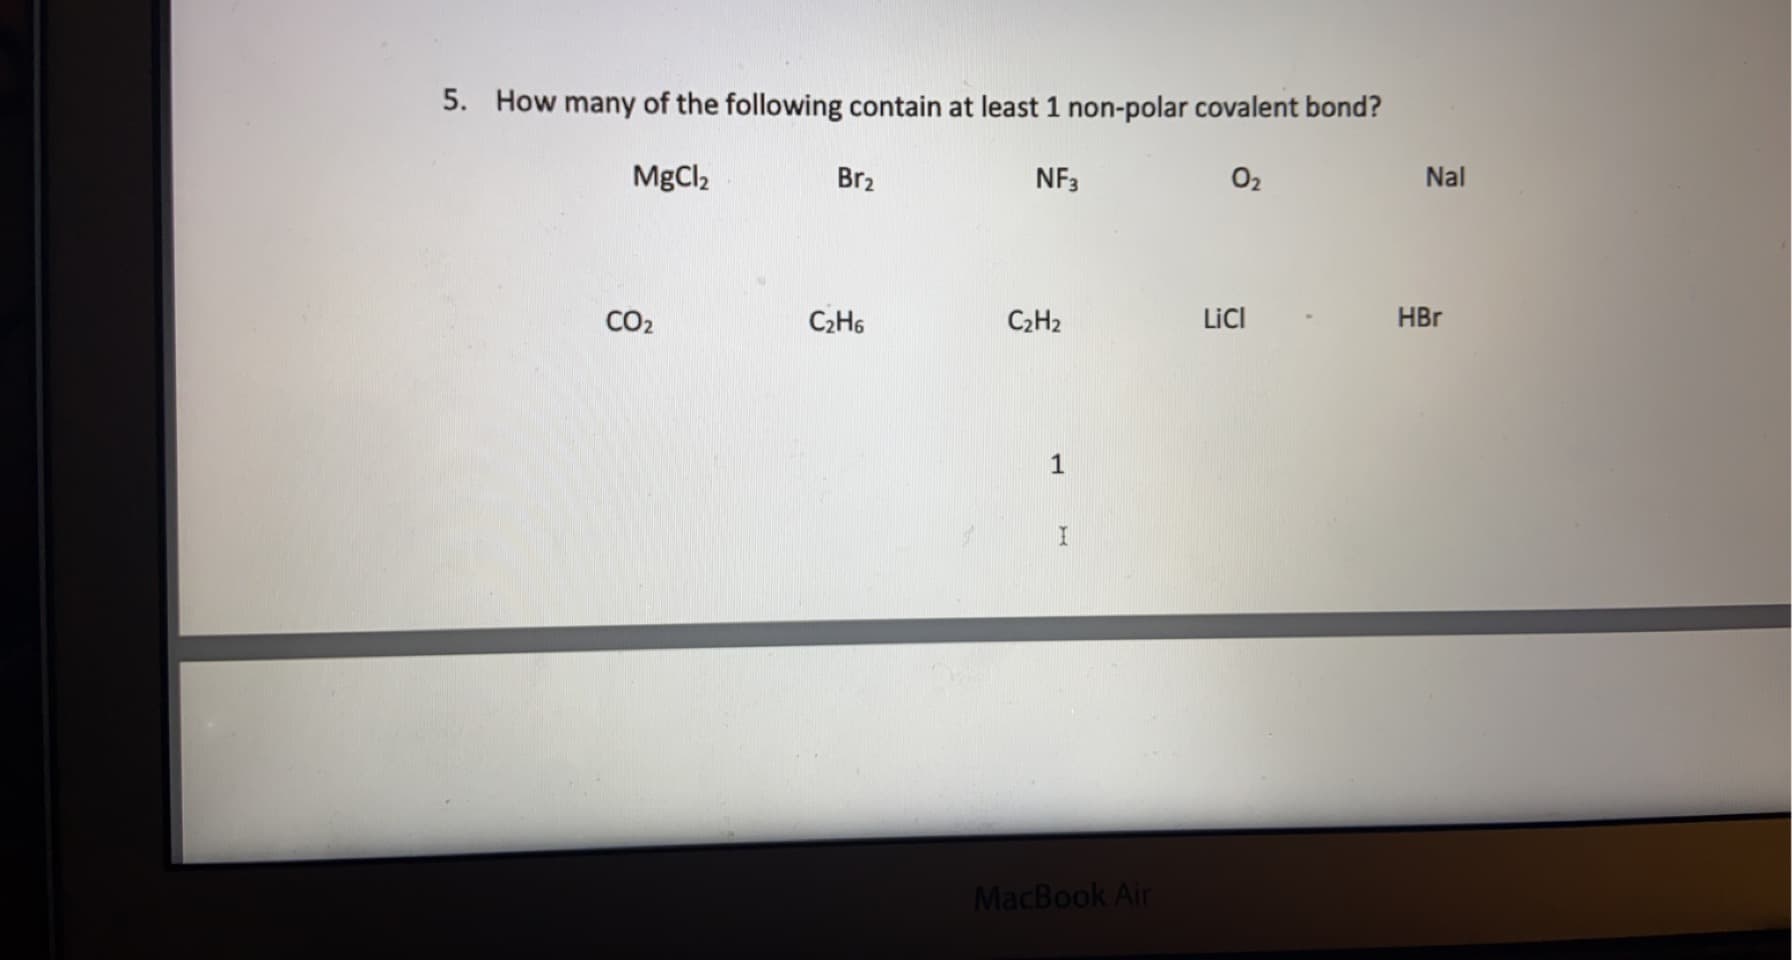 5. How many of the following contain at least 1 non-polar covalent bond?
MgCl2
Br2
NF3
O2
Nal
CO2
C2H6
C2H2
LicI
HBr
